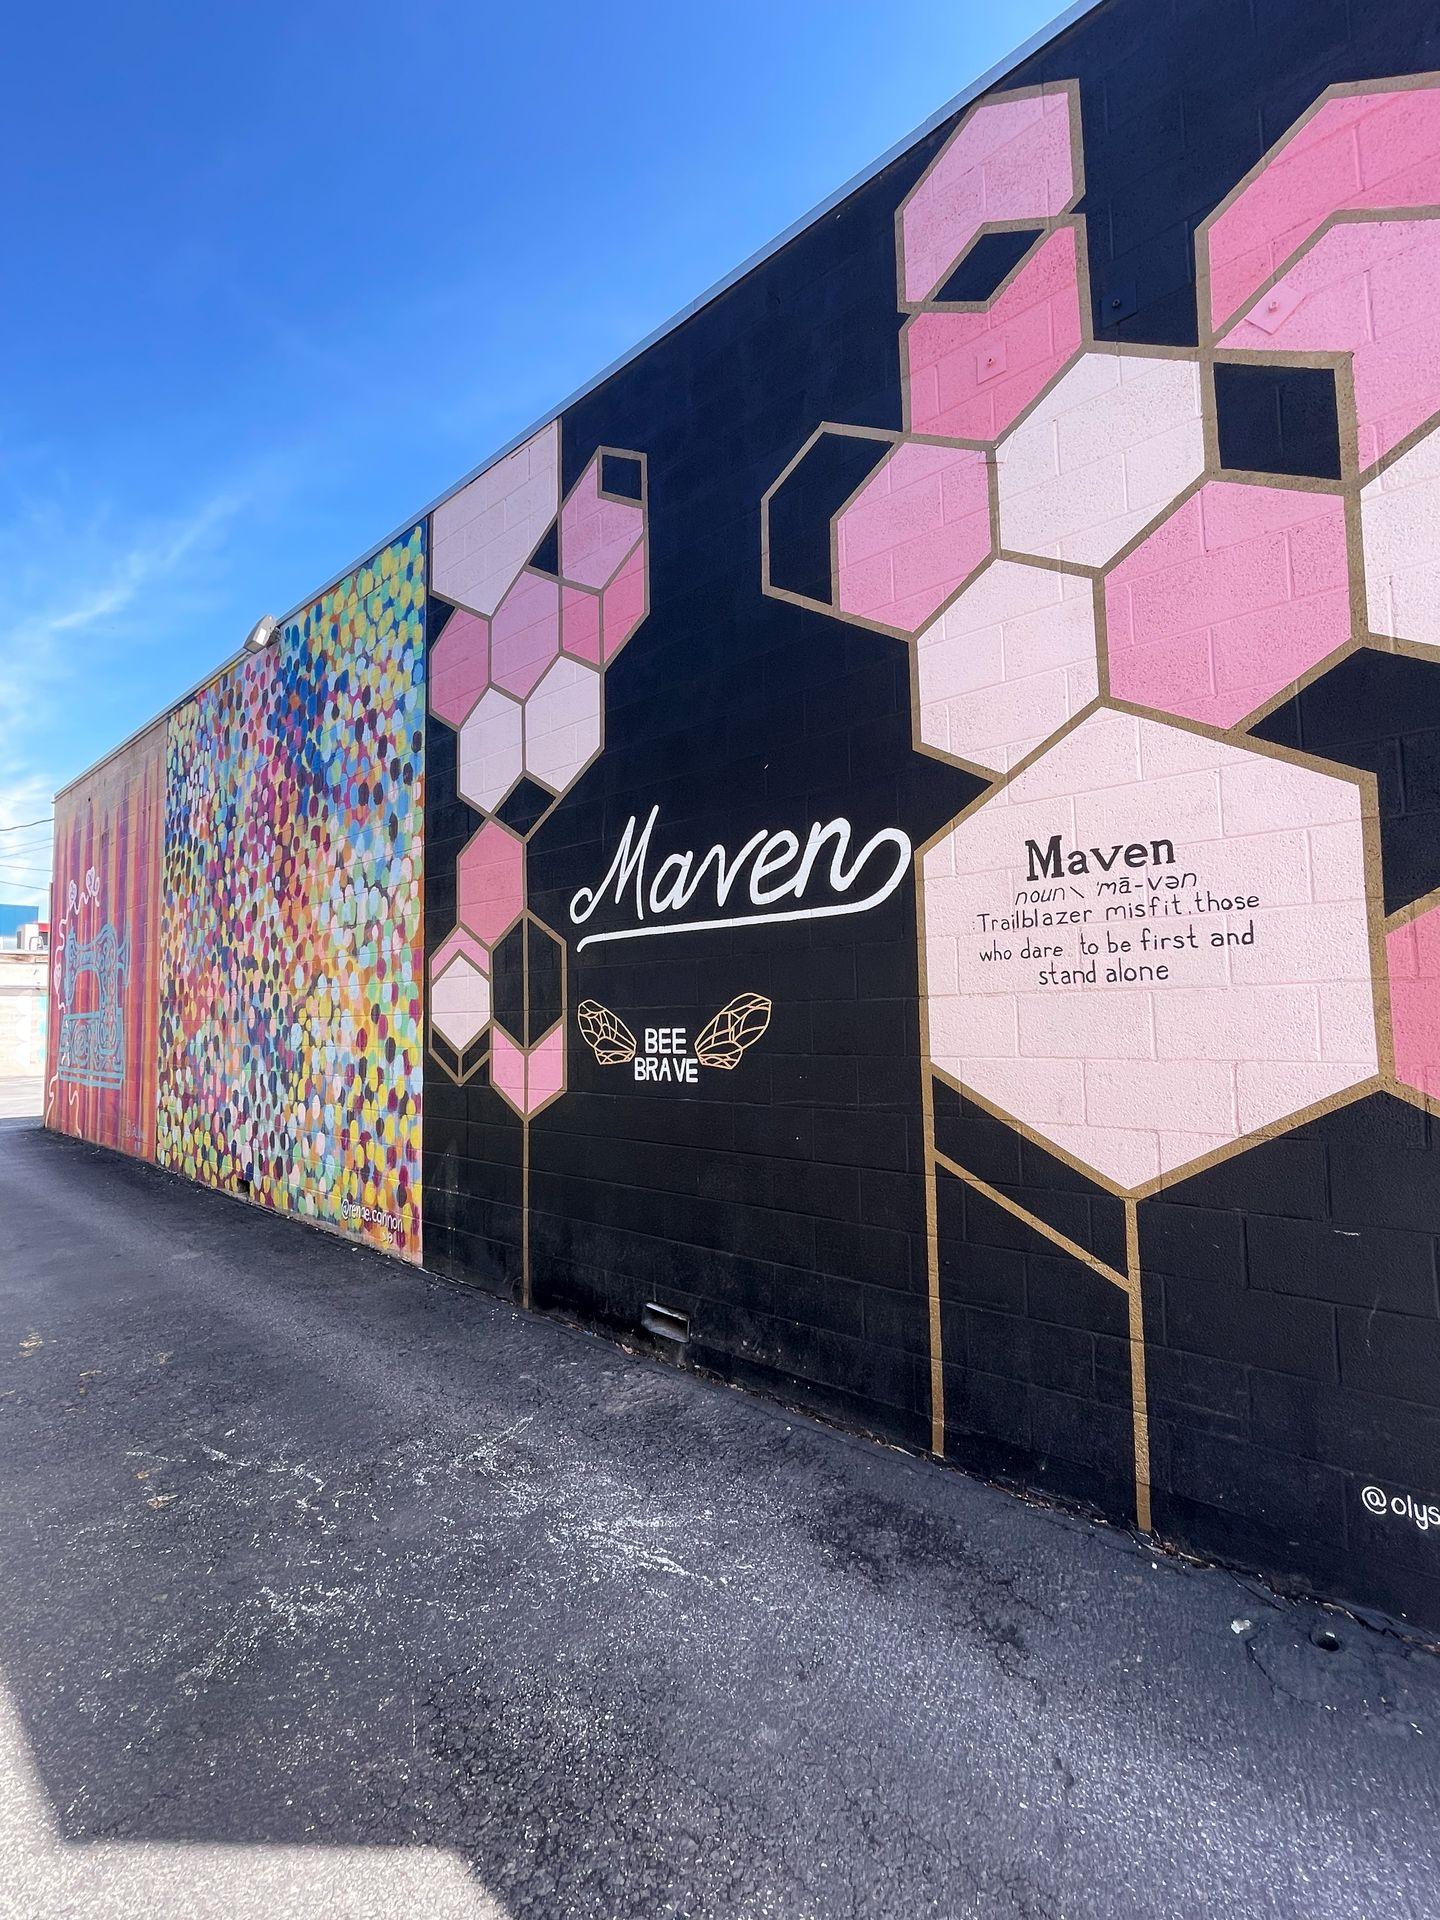 A wall of murals in the Maven District. The closest reads 'Maven' in pink letters on a black wall